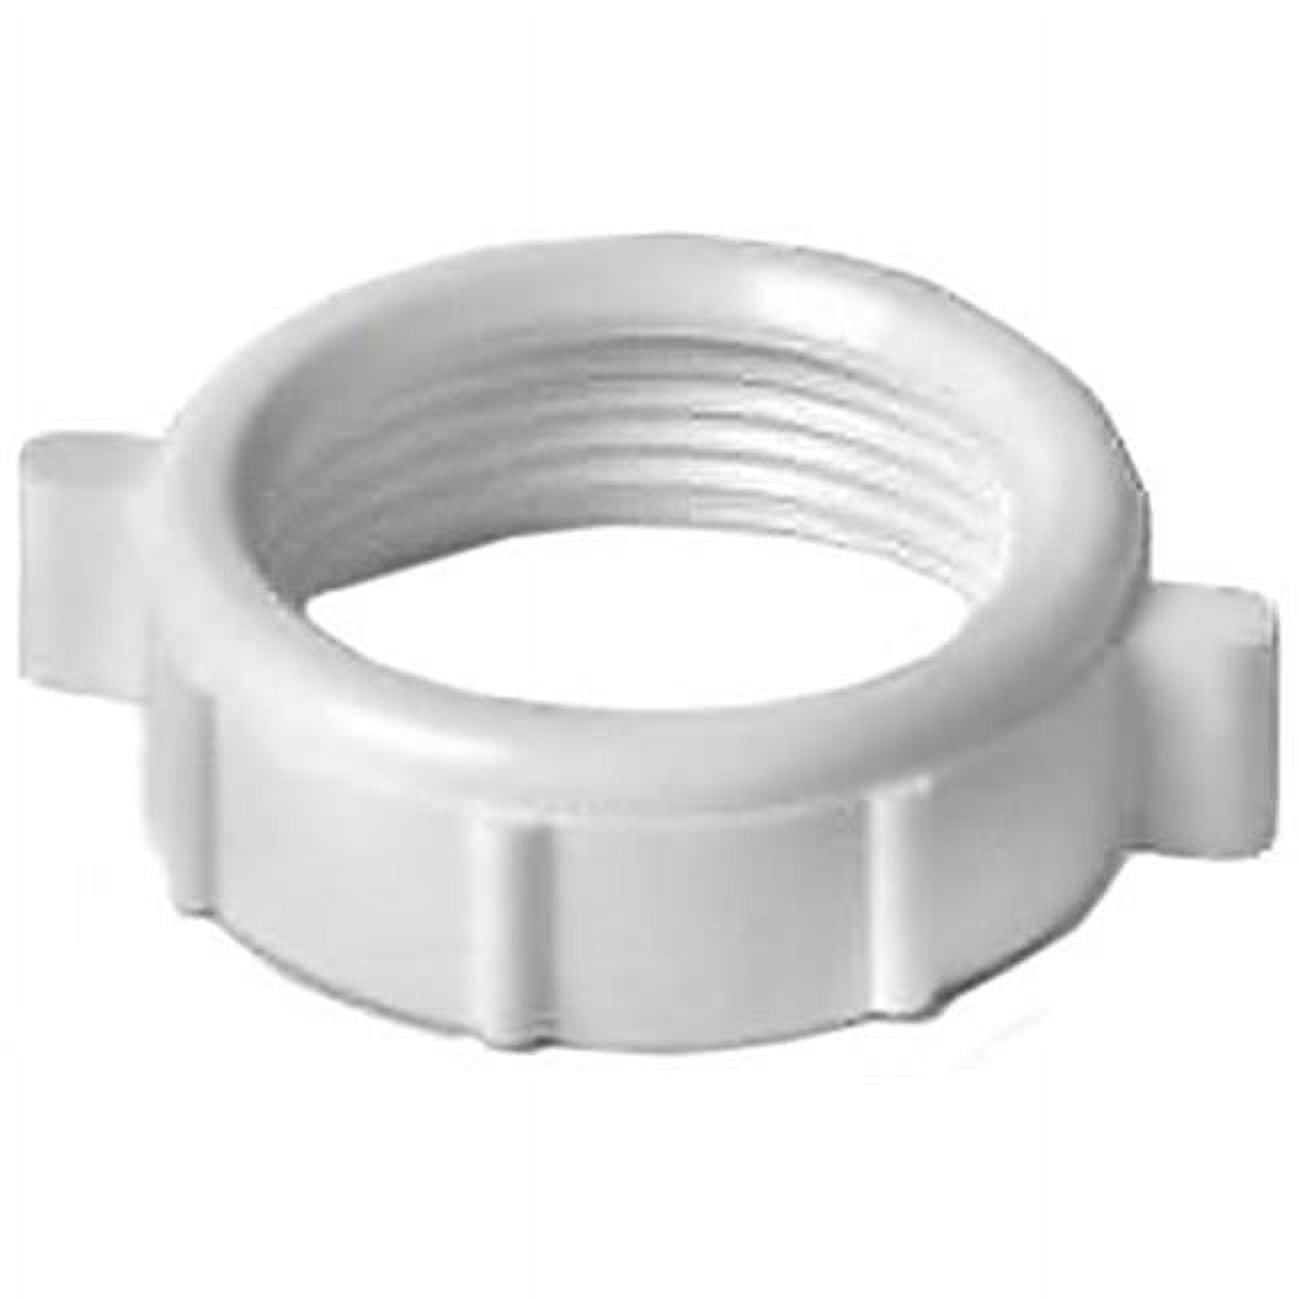 56w 1.25 X 1.25 In. Plastic Slip-joint Wing Nut, White - Pack Of 100